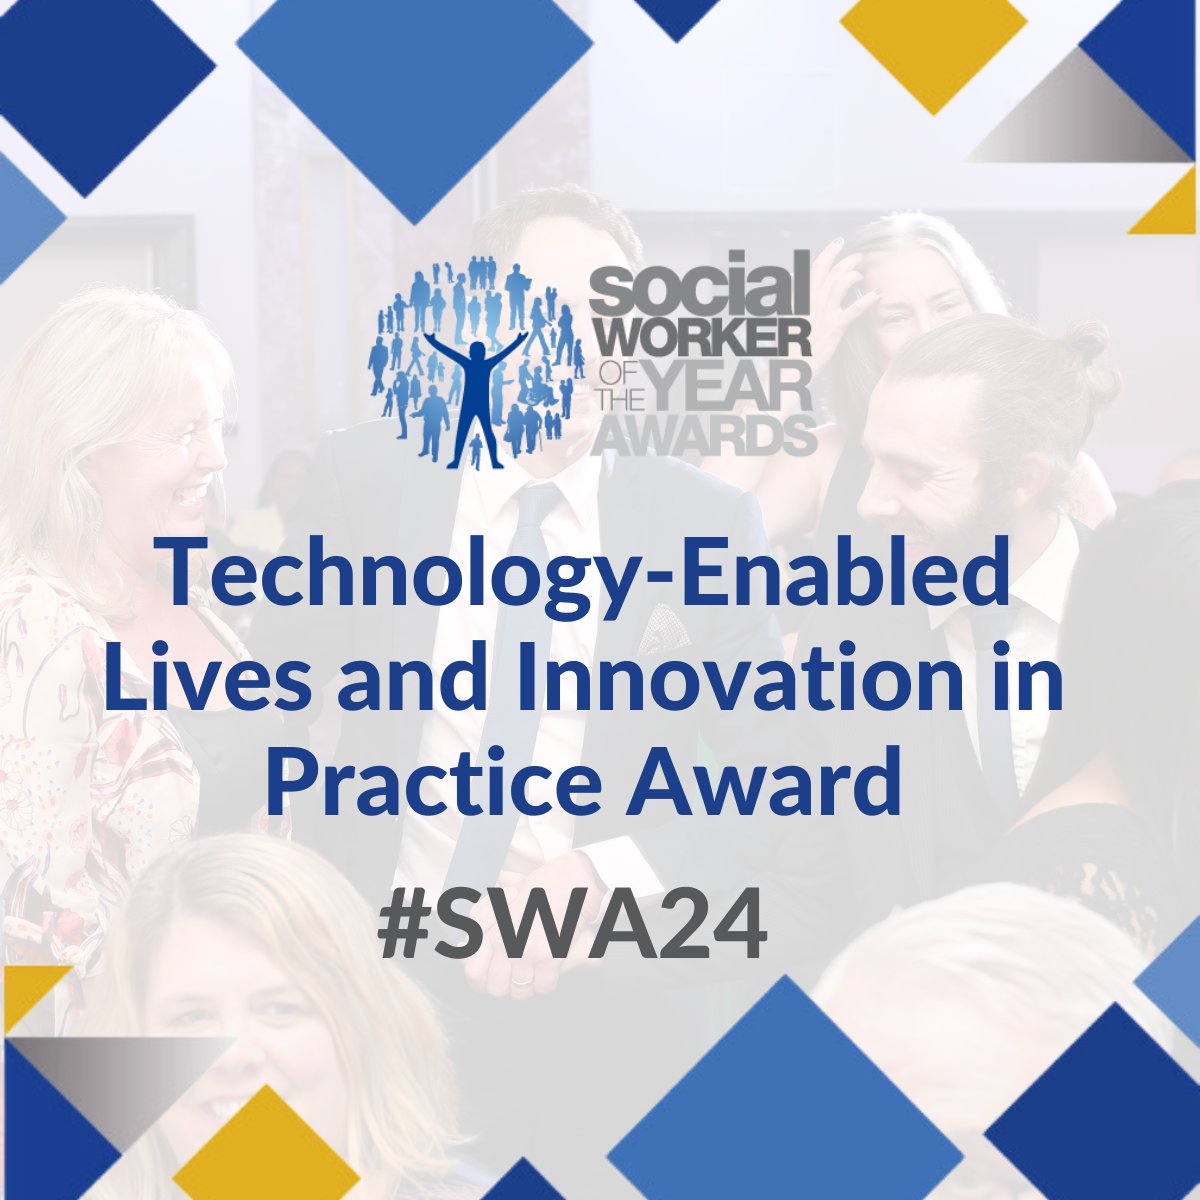 NEW FOR 2024 🌟 🔹 Technology-Enabled Lives and Innovation in Practice Award 🔹 Do you know a social worker who has used technology to enhance someone's quality of life or made a meaningful impact? Nominate them here: socialworkawards.com #SWA24